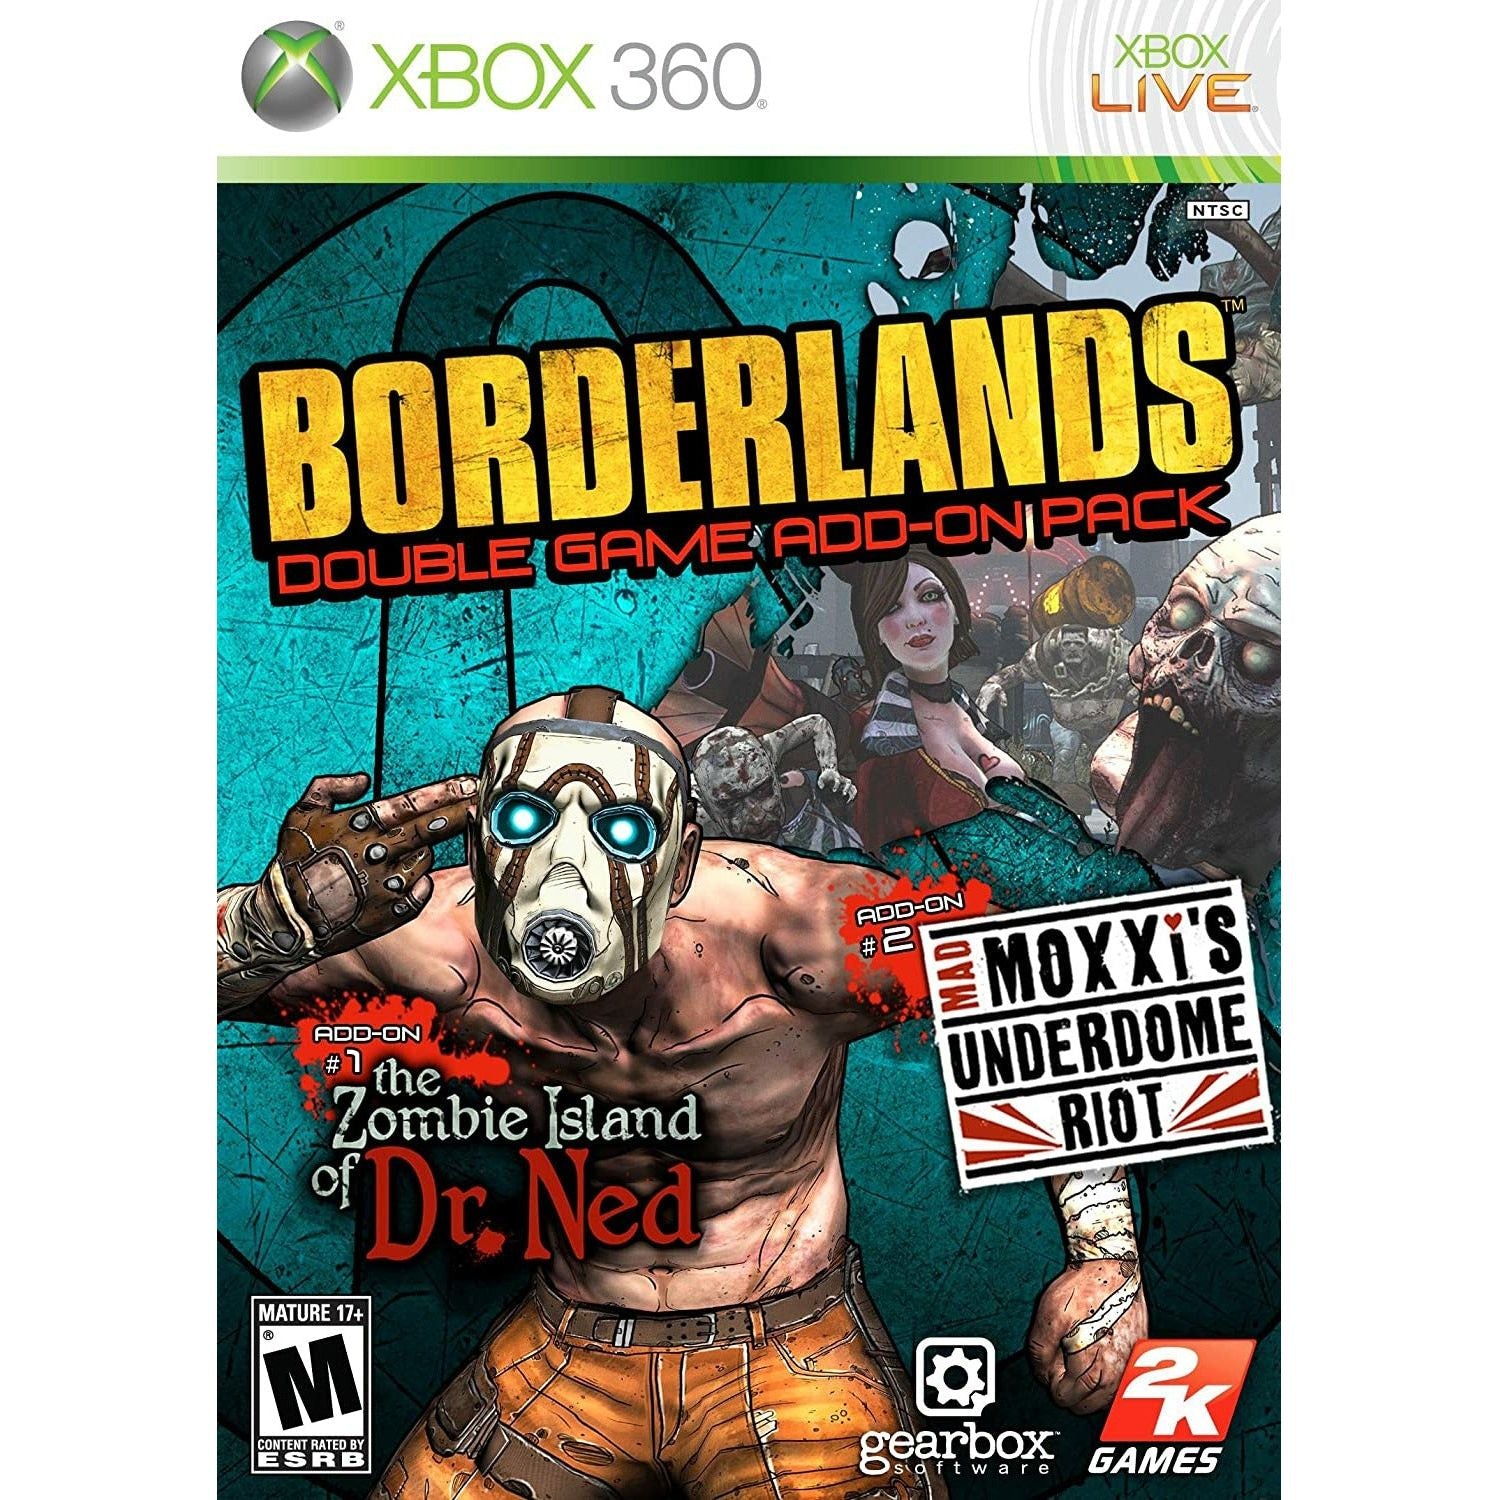 XBOX 360 - Borderlands Double Game Add-On Pack 1 & 2